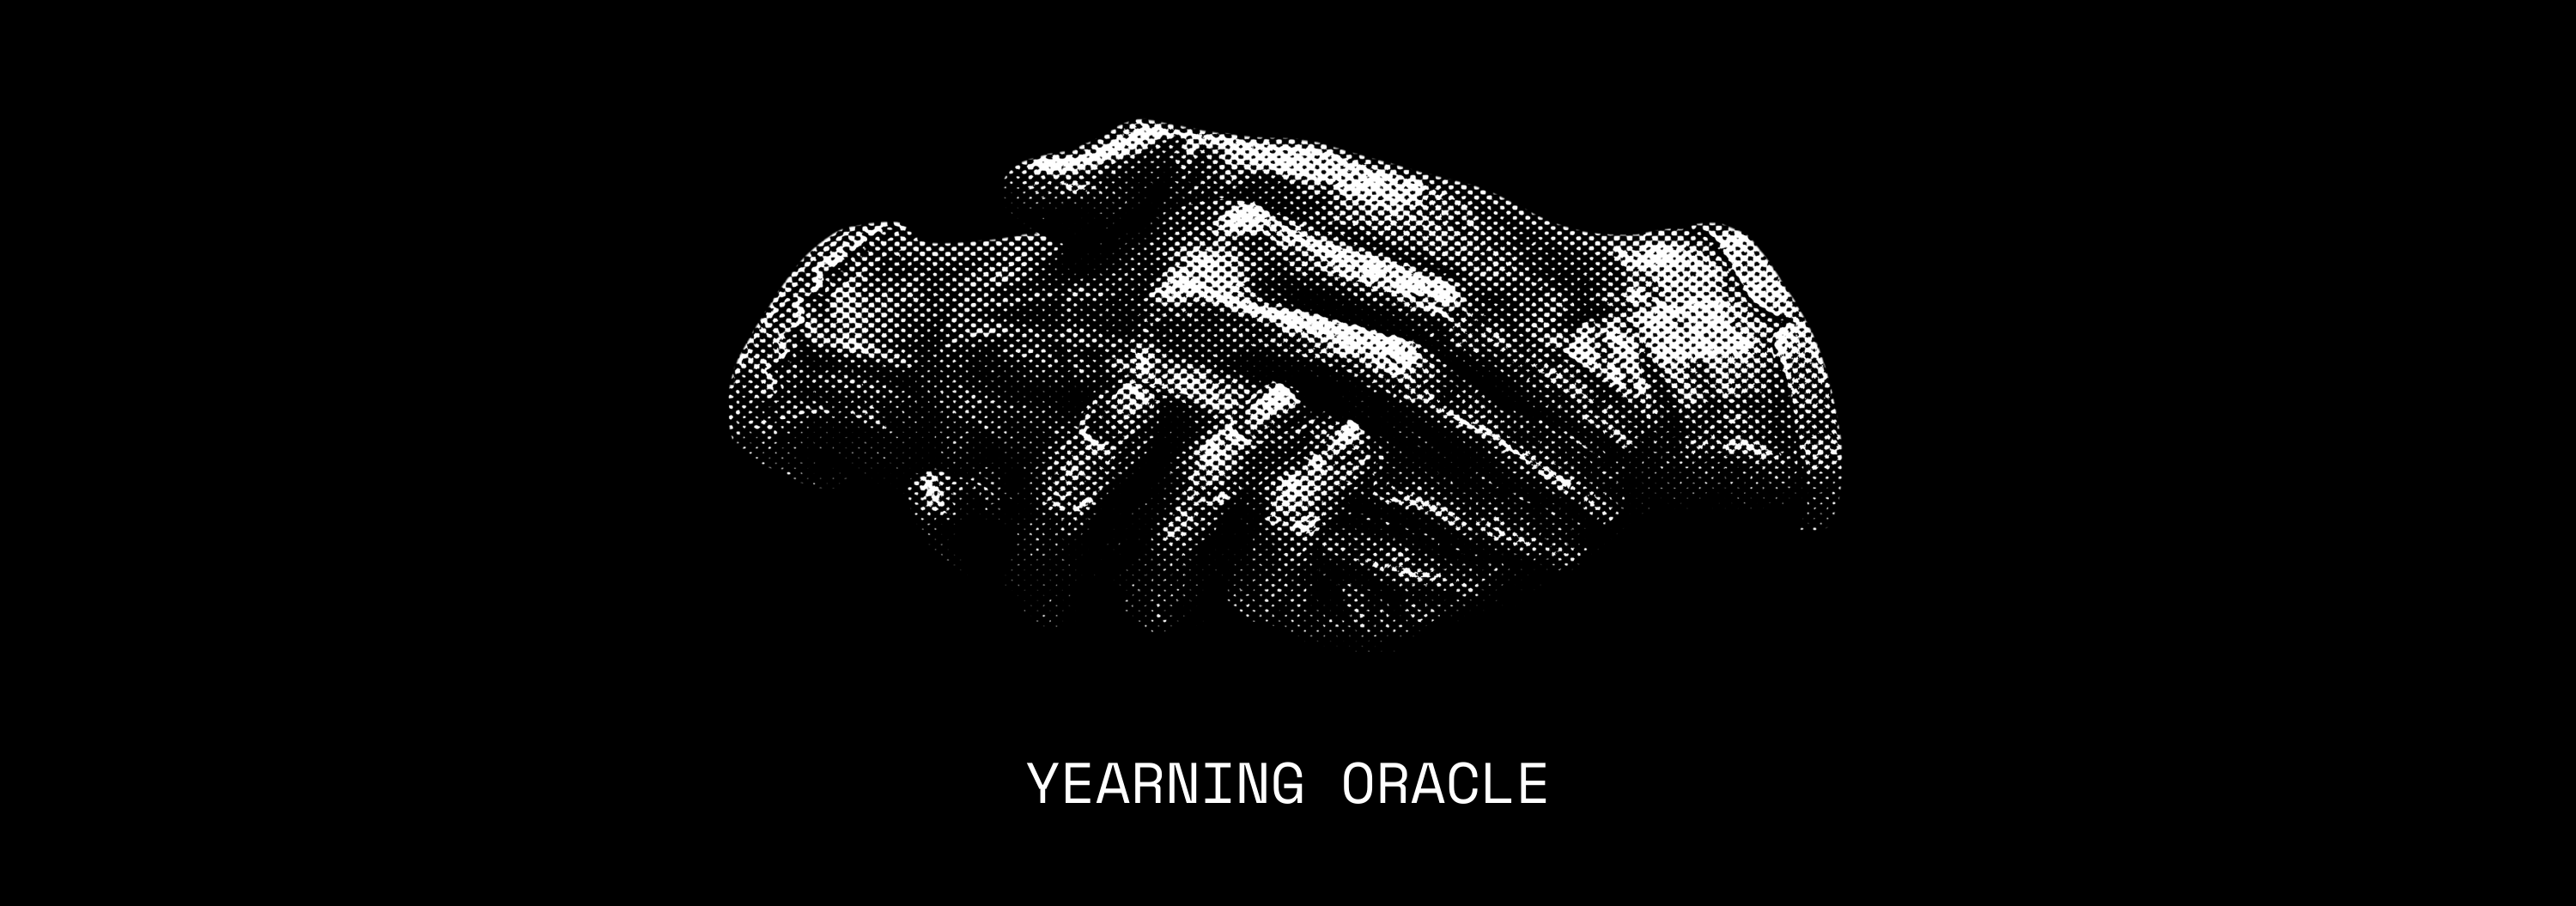 Yearning Oracle